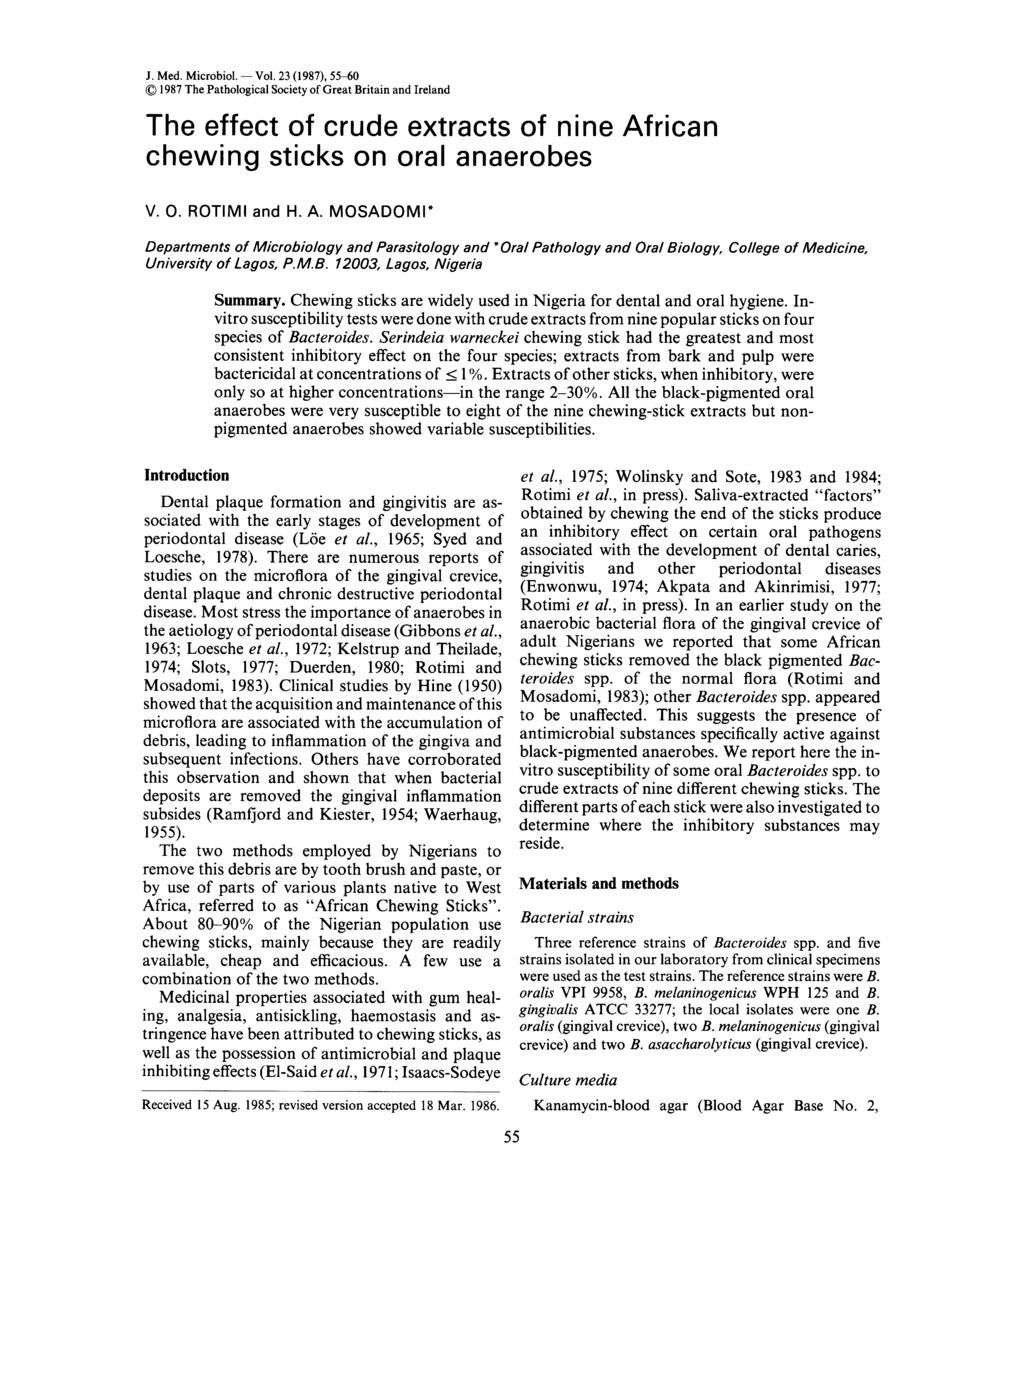 J. Med. Microbiol. - Vol. 23 (1987), 55-60 0 1987 The Pathological Society of Great Britain and Ireland The effect of crude extracts of nine African chewing sticks on oral anaerobes V. 0. ROTIMI and H.